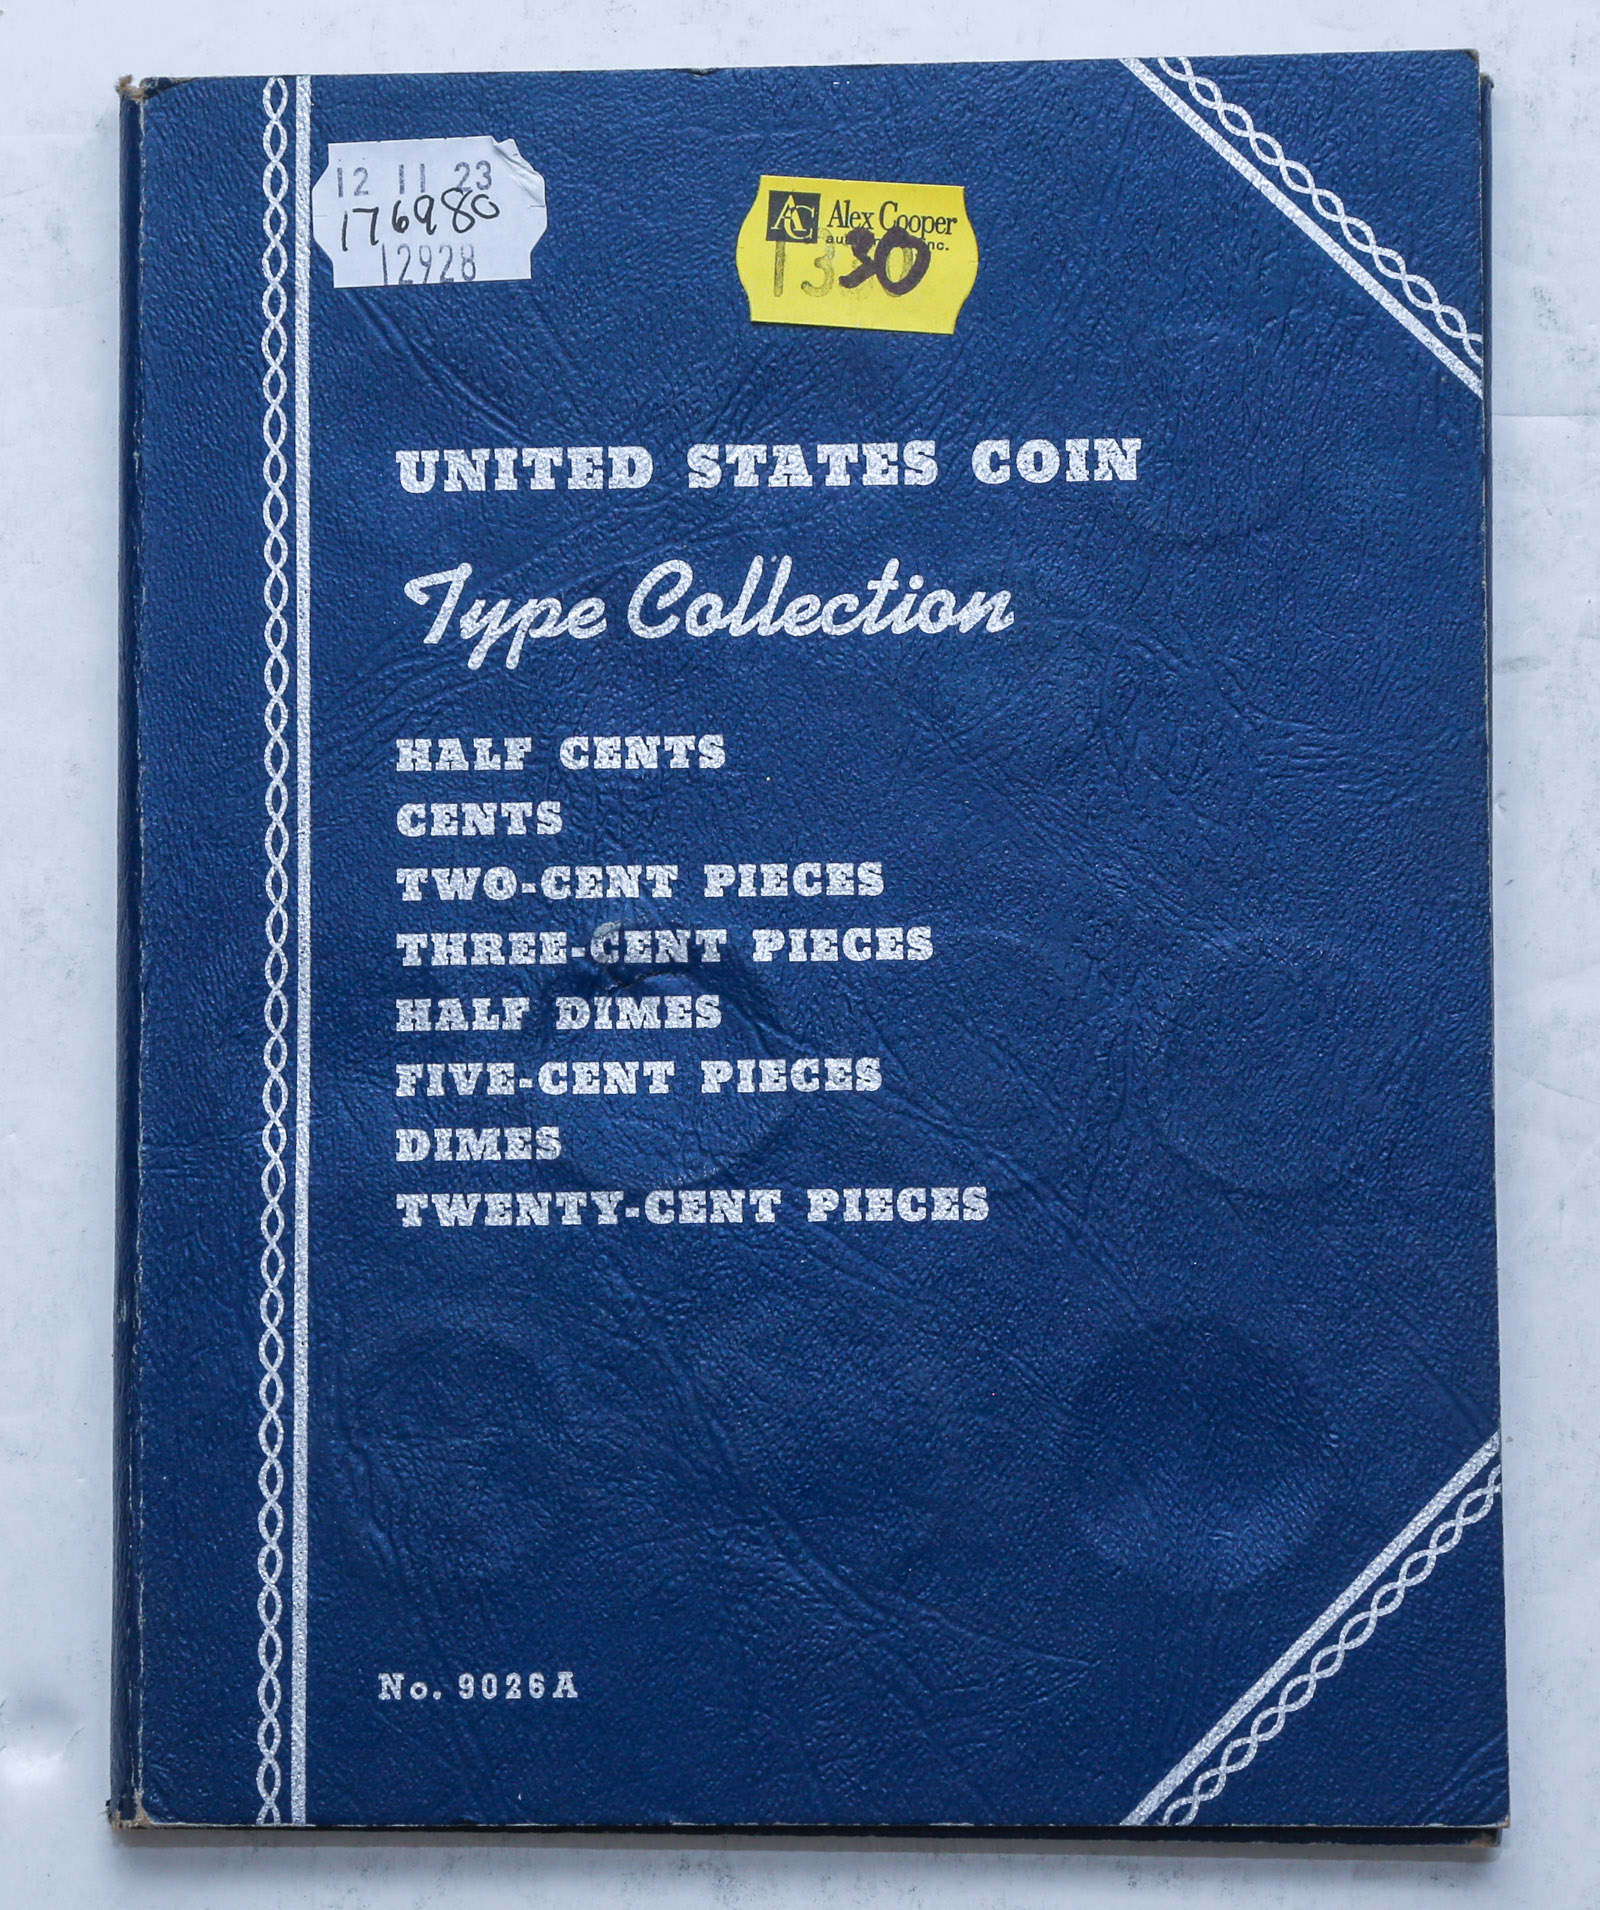 U.S TYPE COLLECTION WITH 25 COINS